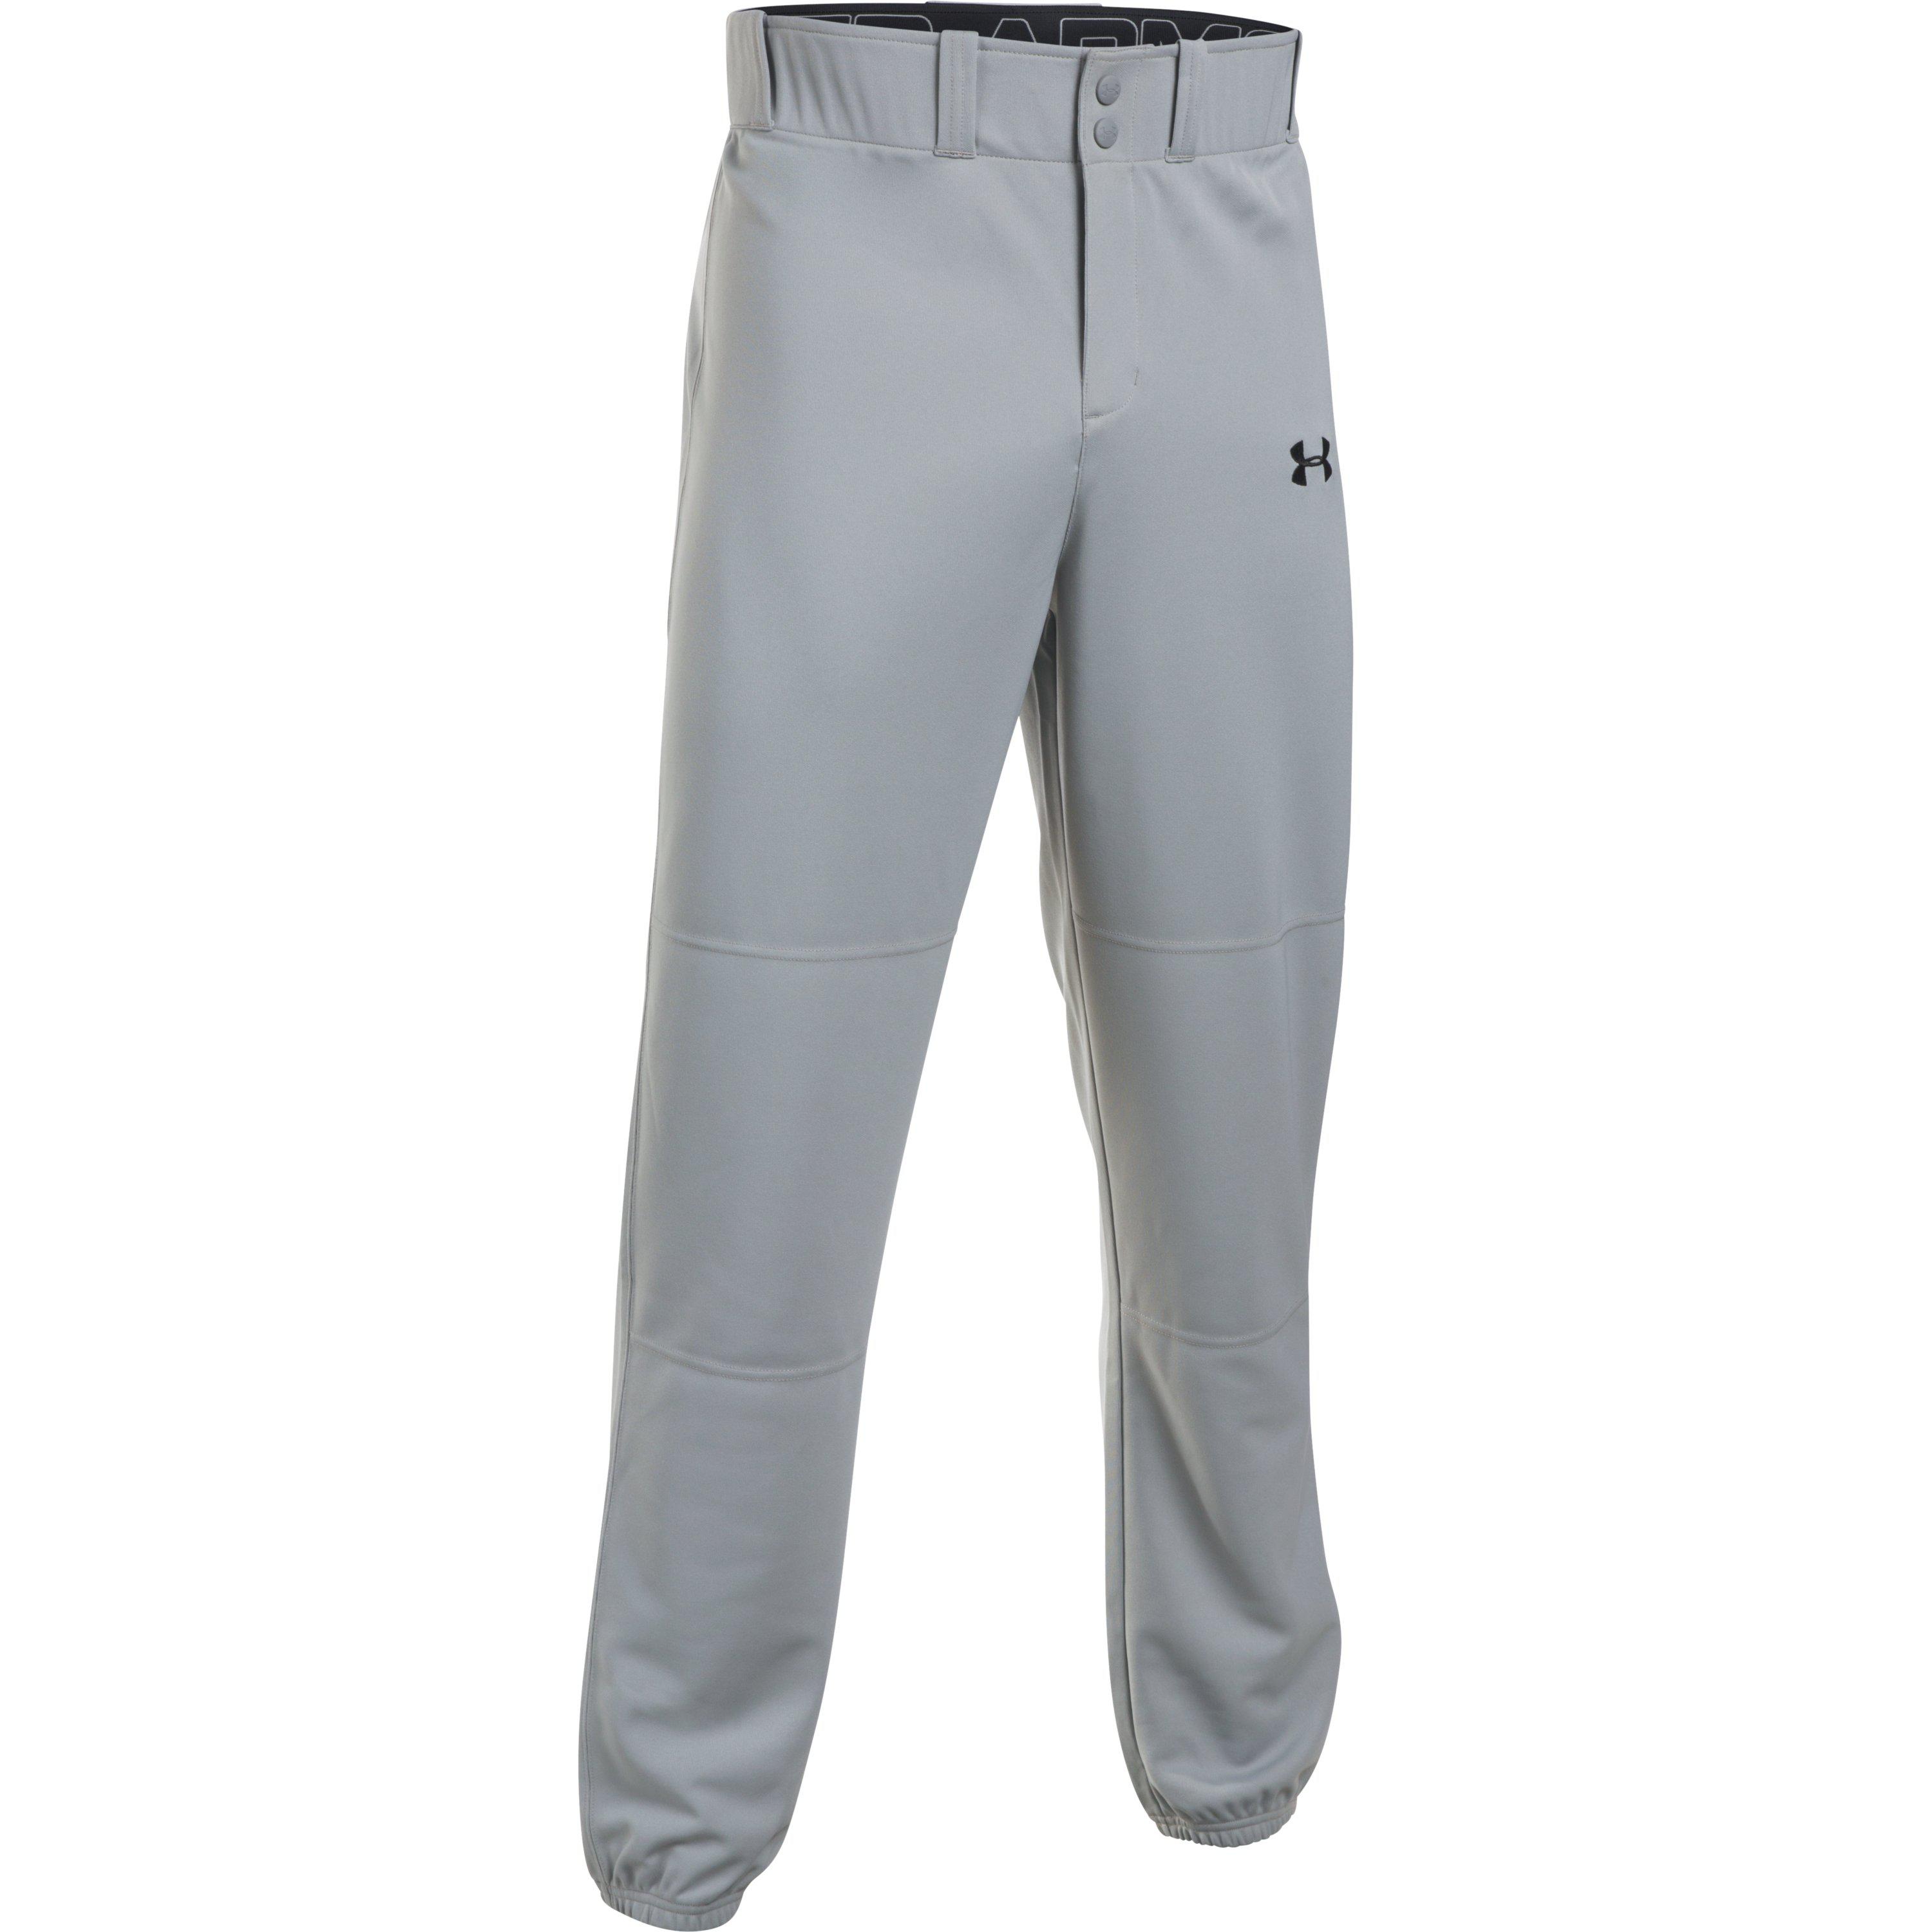 Under Armour Men's Ua Clean Up Cuffed Baseball Pants for Men - Lyst